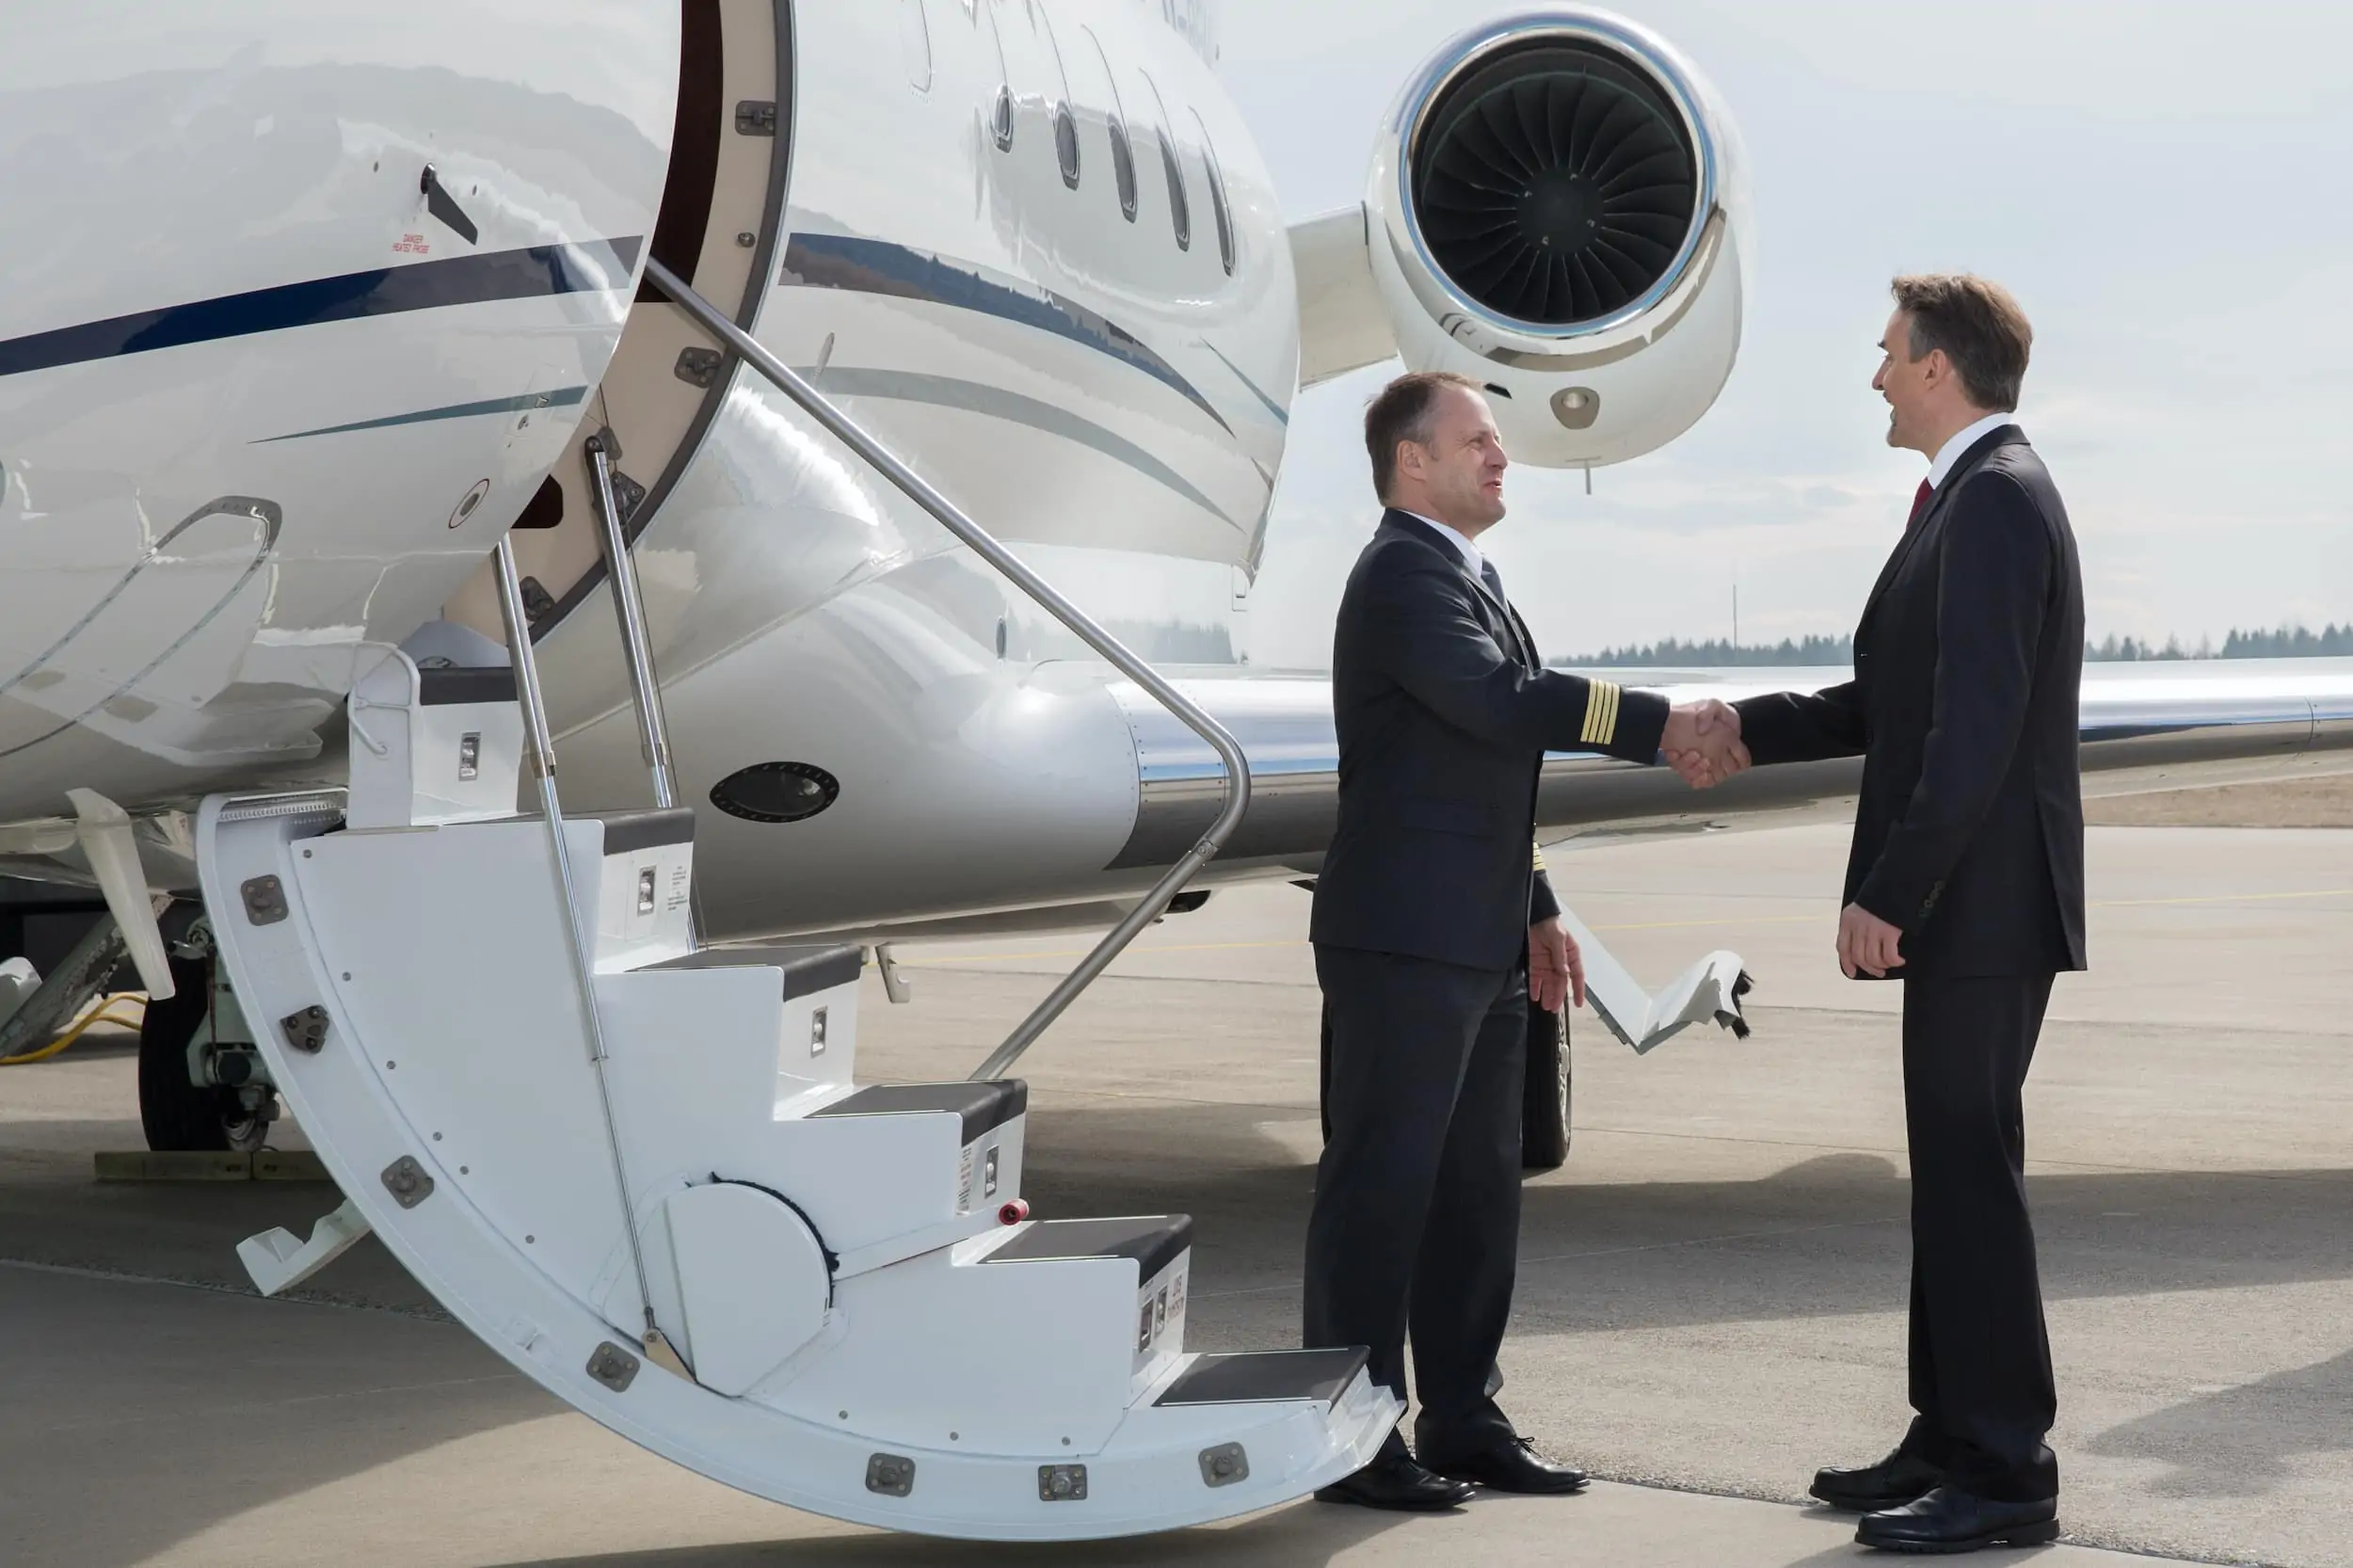 Men shaking hands next to private jet ownership